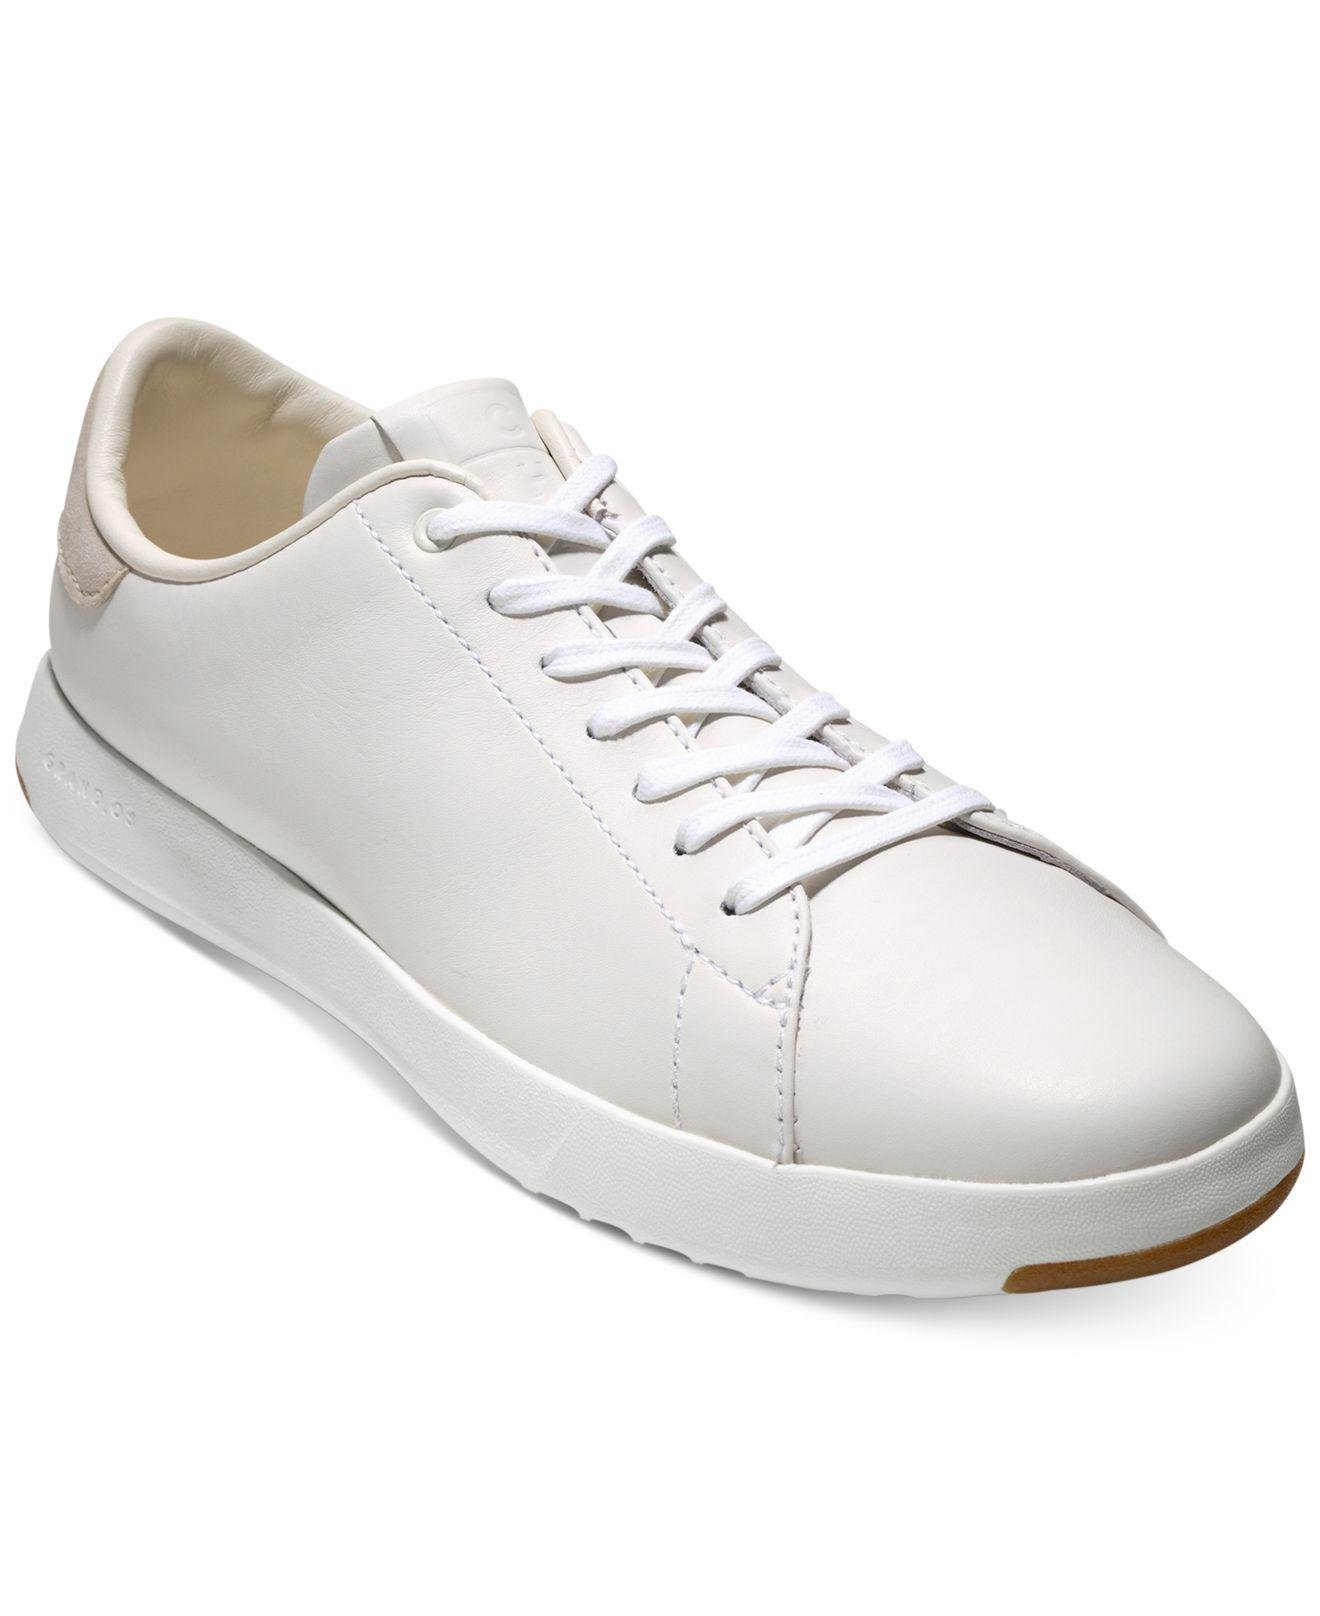 Cole Haan Men's Grandpro Leather Tennis Sneakers in White for Men - Lyst